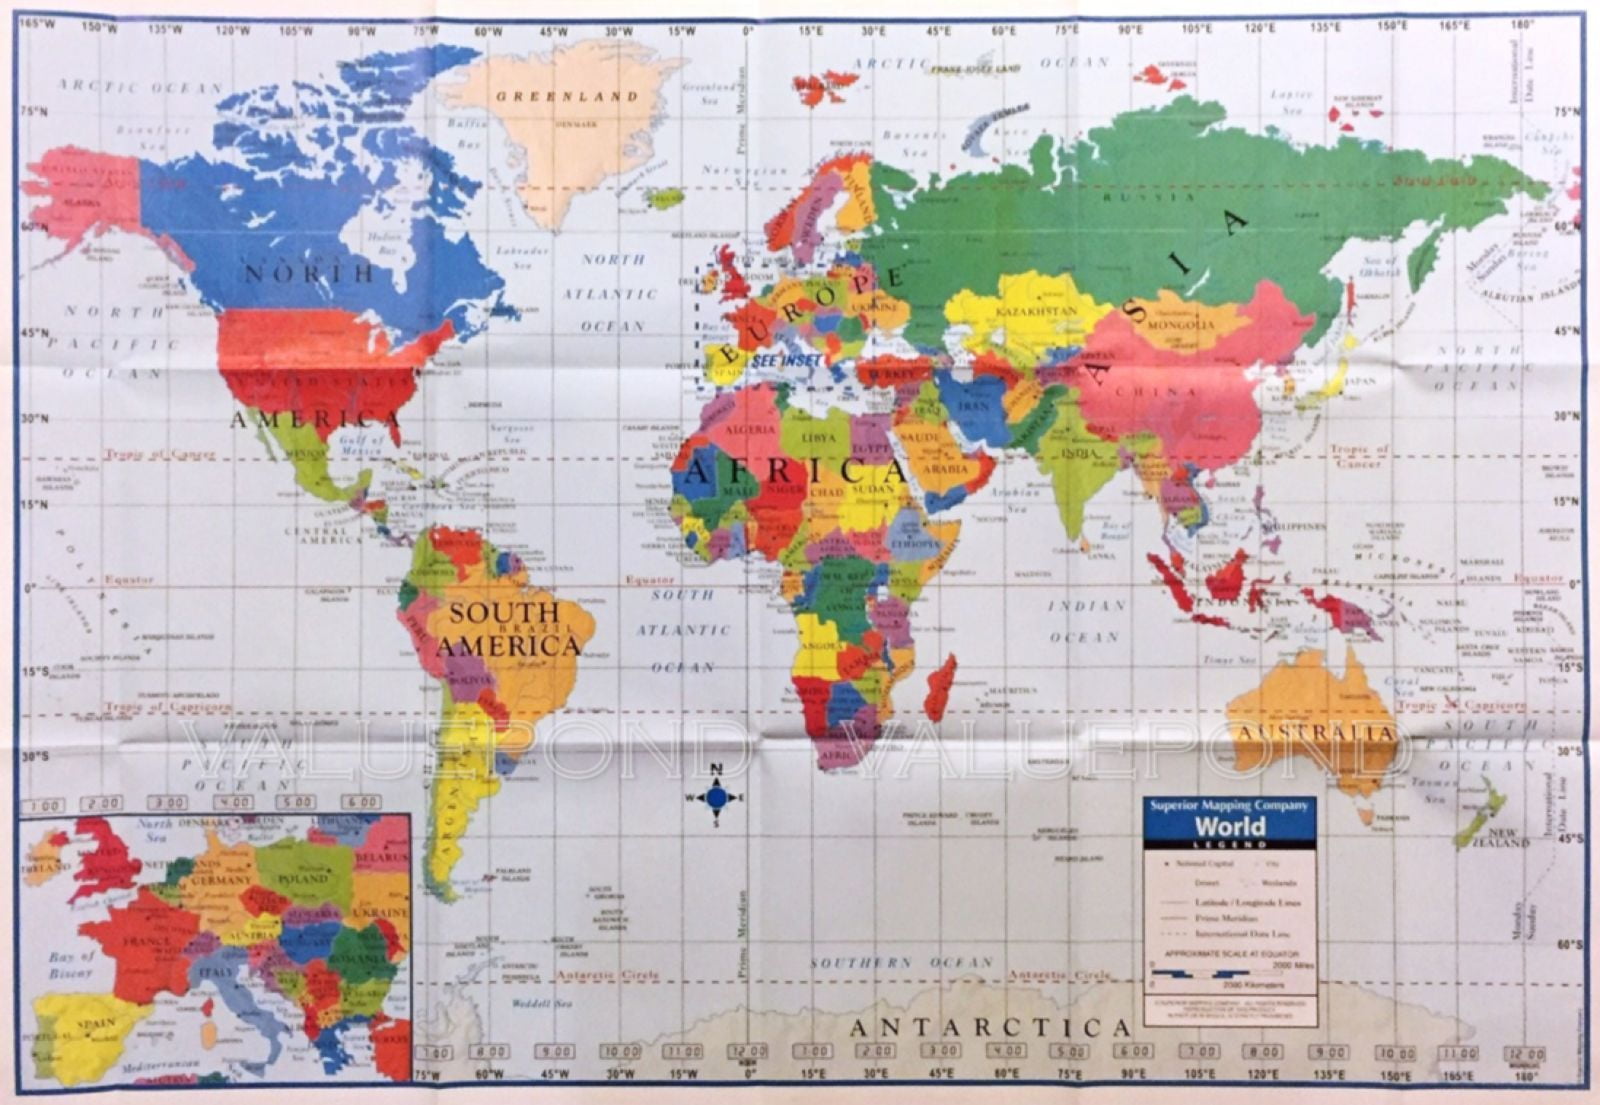 World Money currency World Map Poster 40x27 36x24 18x12" Family Art Decor